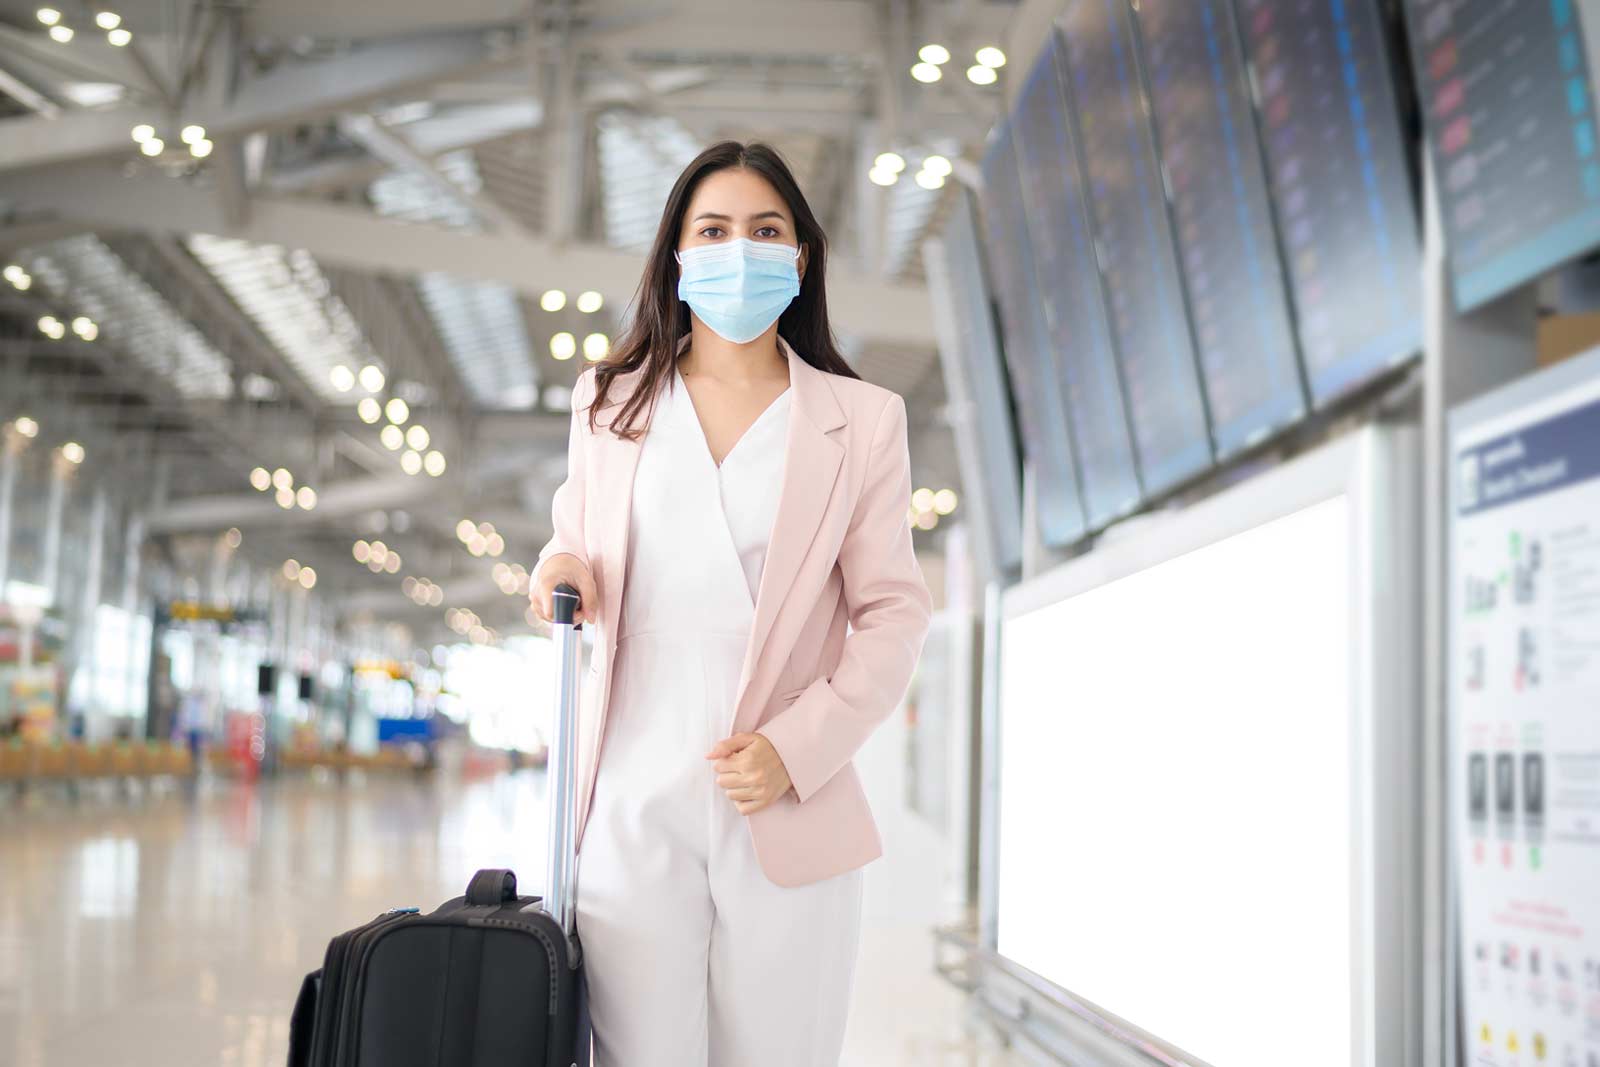 Corporate travel during the COVID-19 pandemic